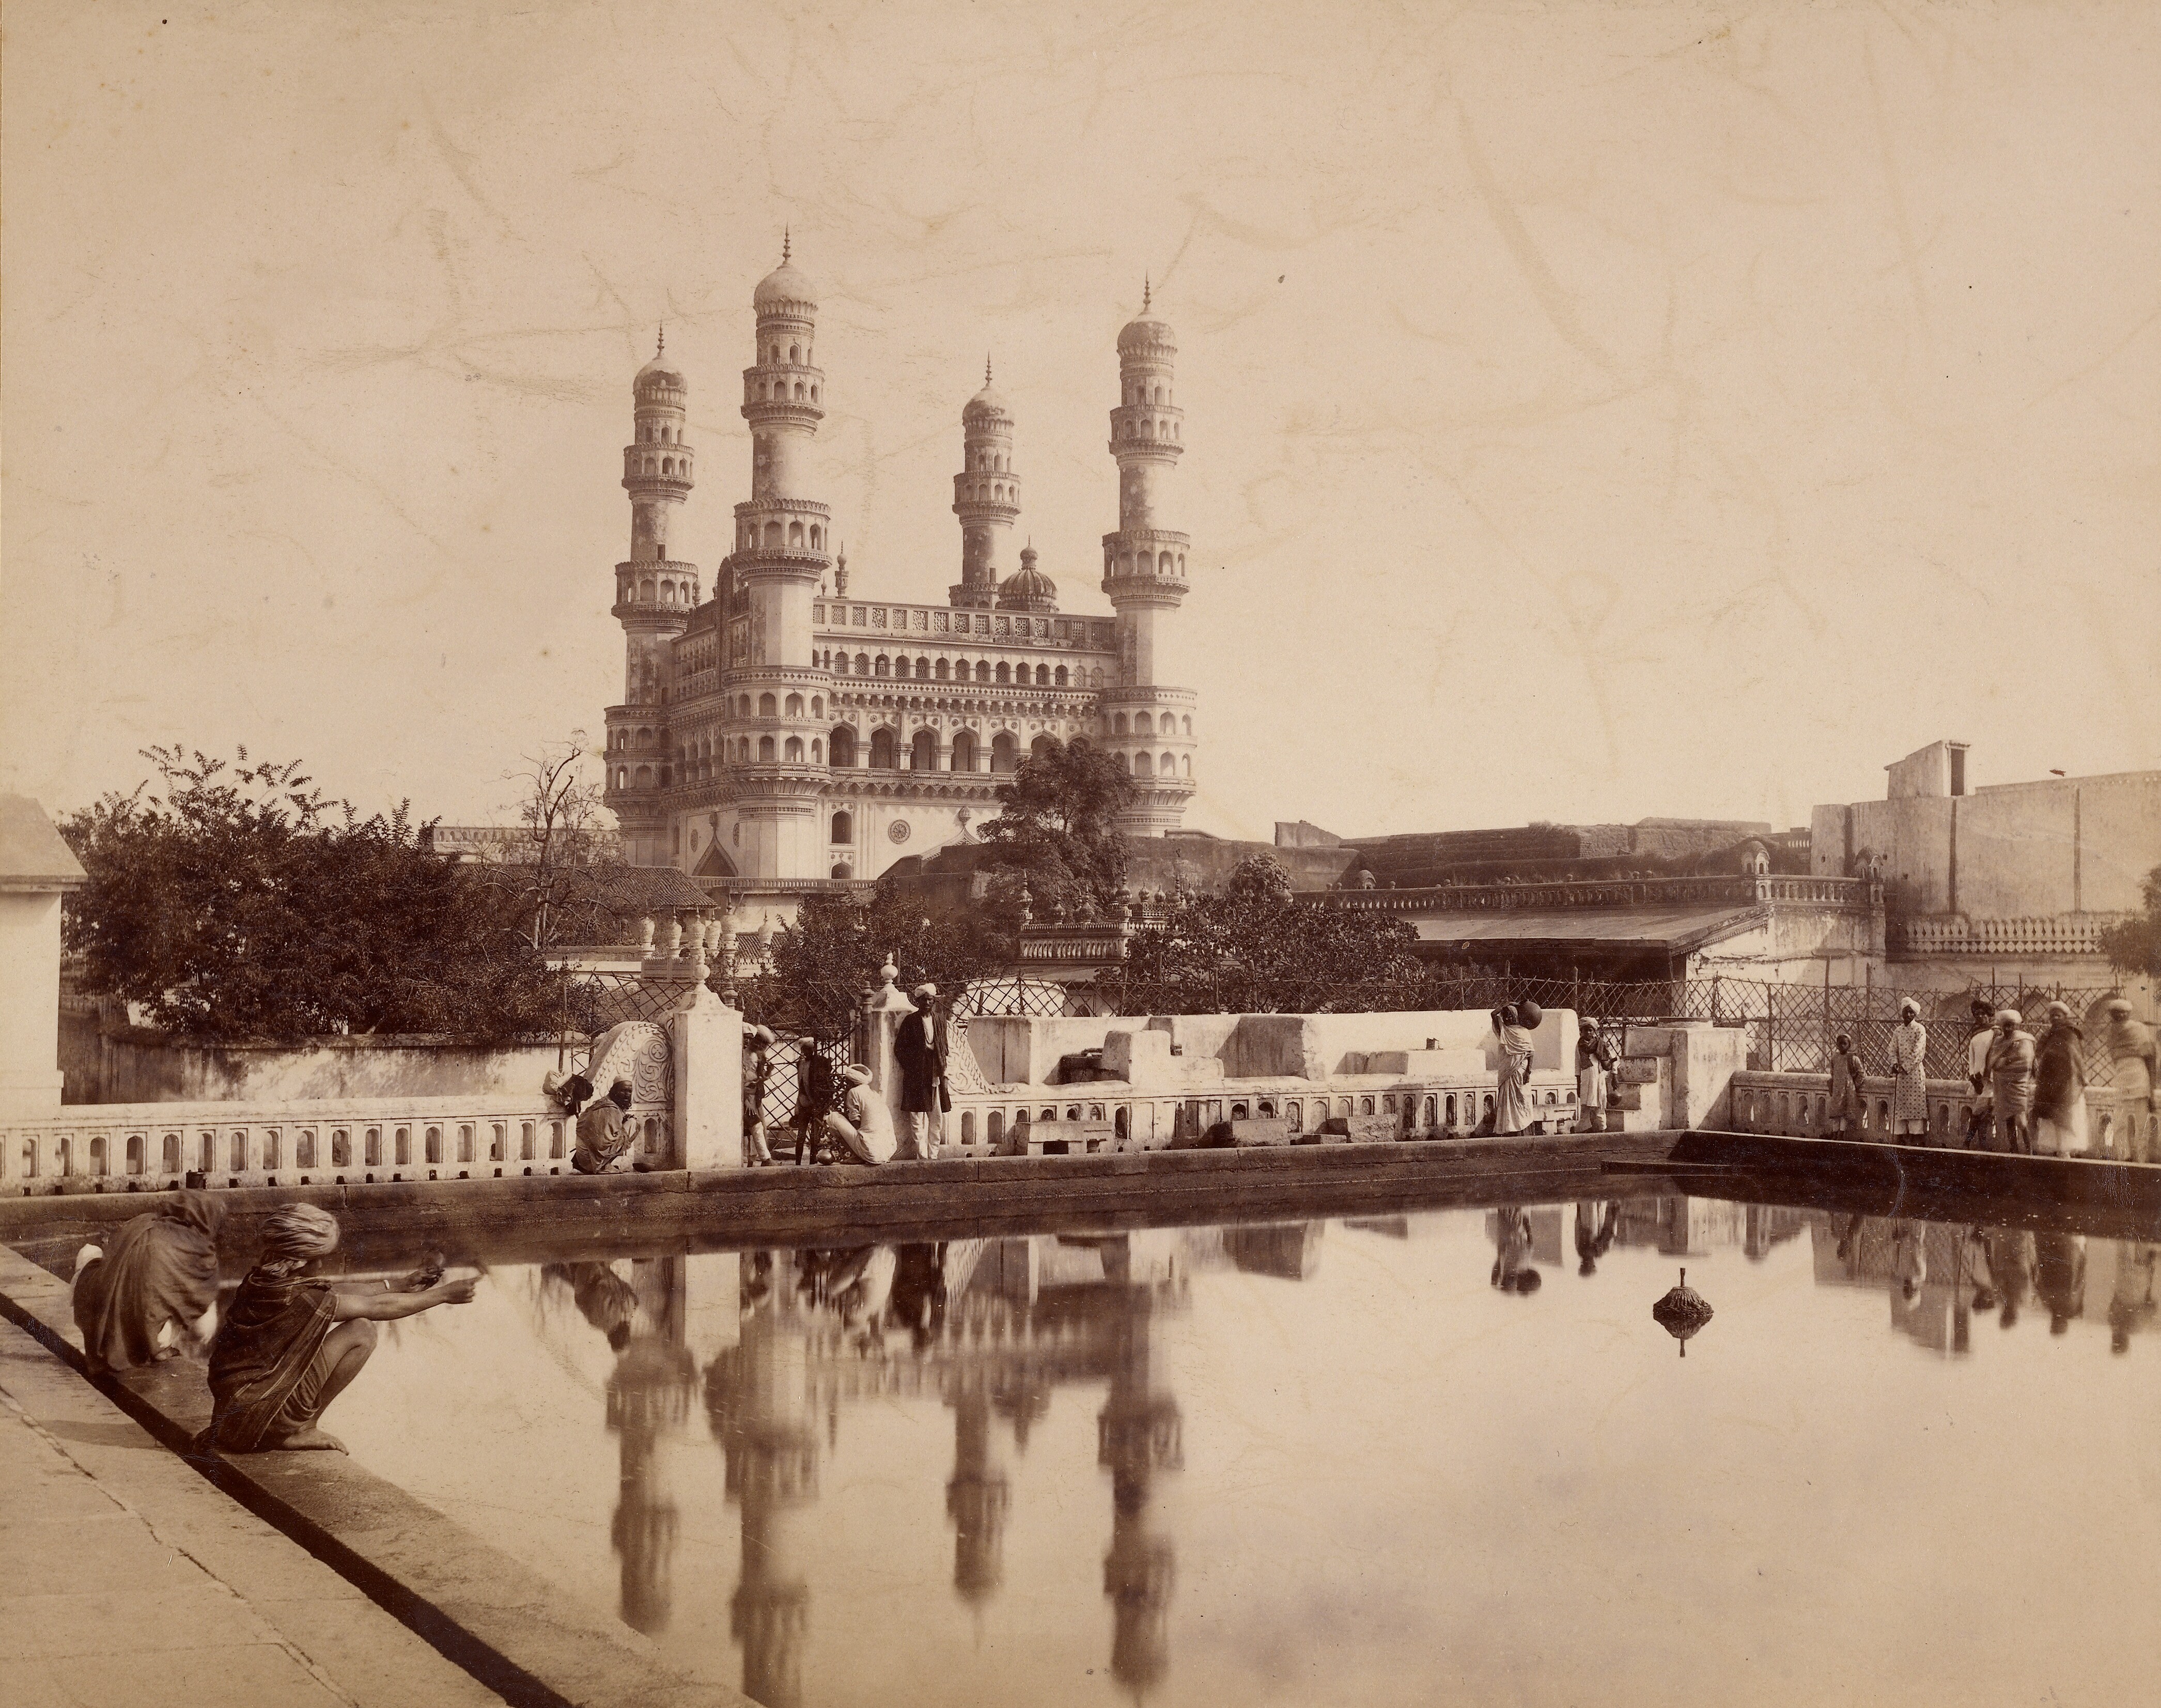 View of Charminar from Mecca or Makkah Masjid (Mosque), Hyderabad (Deccan), Telangana, India | Rare & Old Vintage Photos (1887)